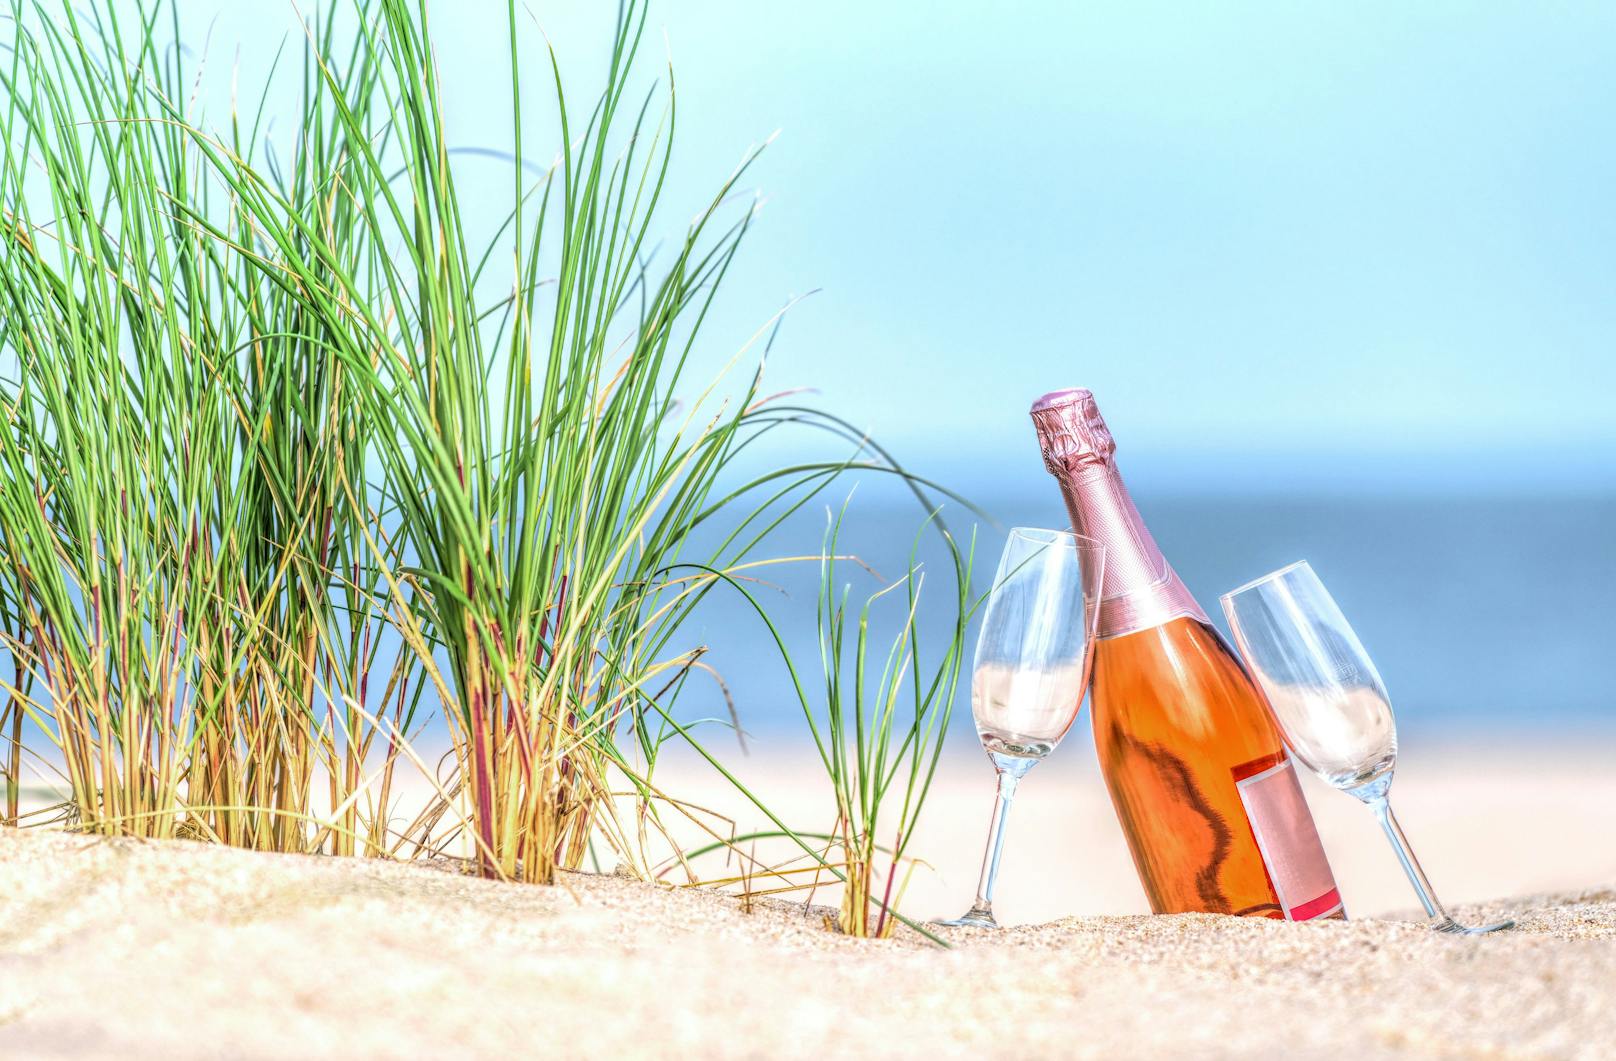 Bottle of rose colored champagne with drinking glasses on beach.